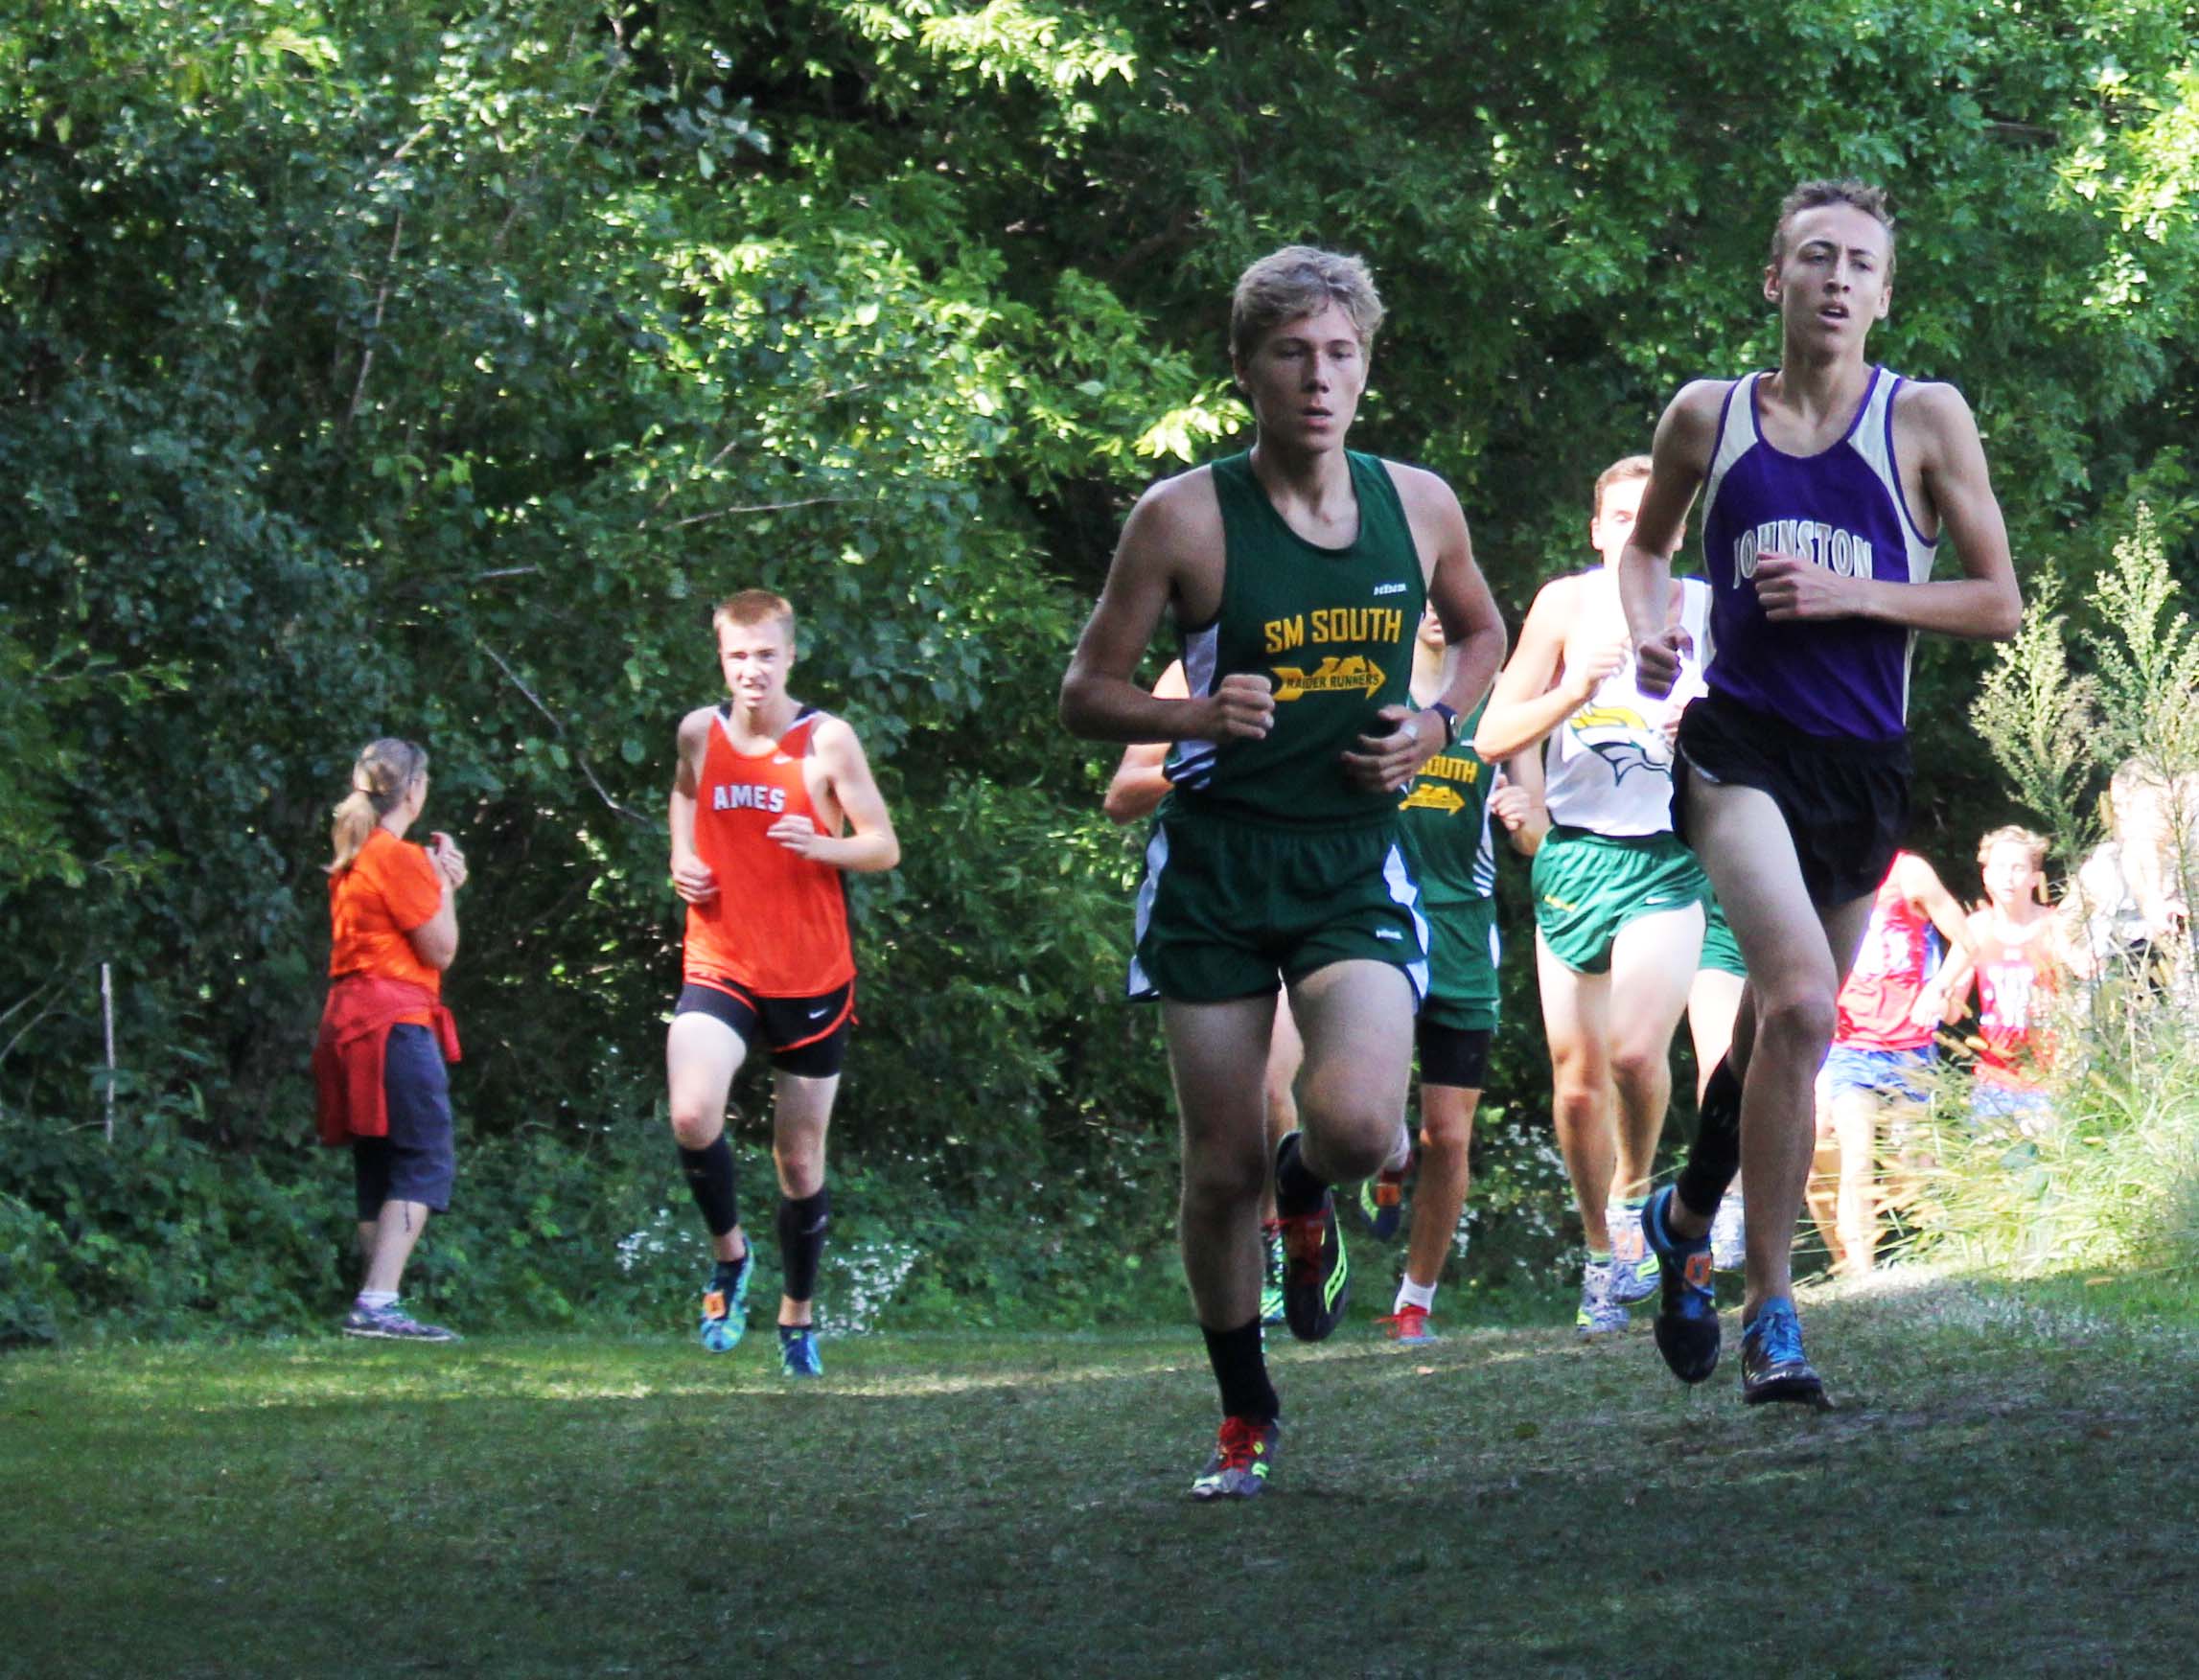 Riley Chartier 17 works to quicken his pace. Cross Country had a meet Oct. 13 at Marshalltown Community College.